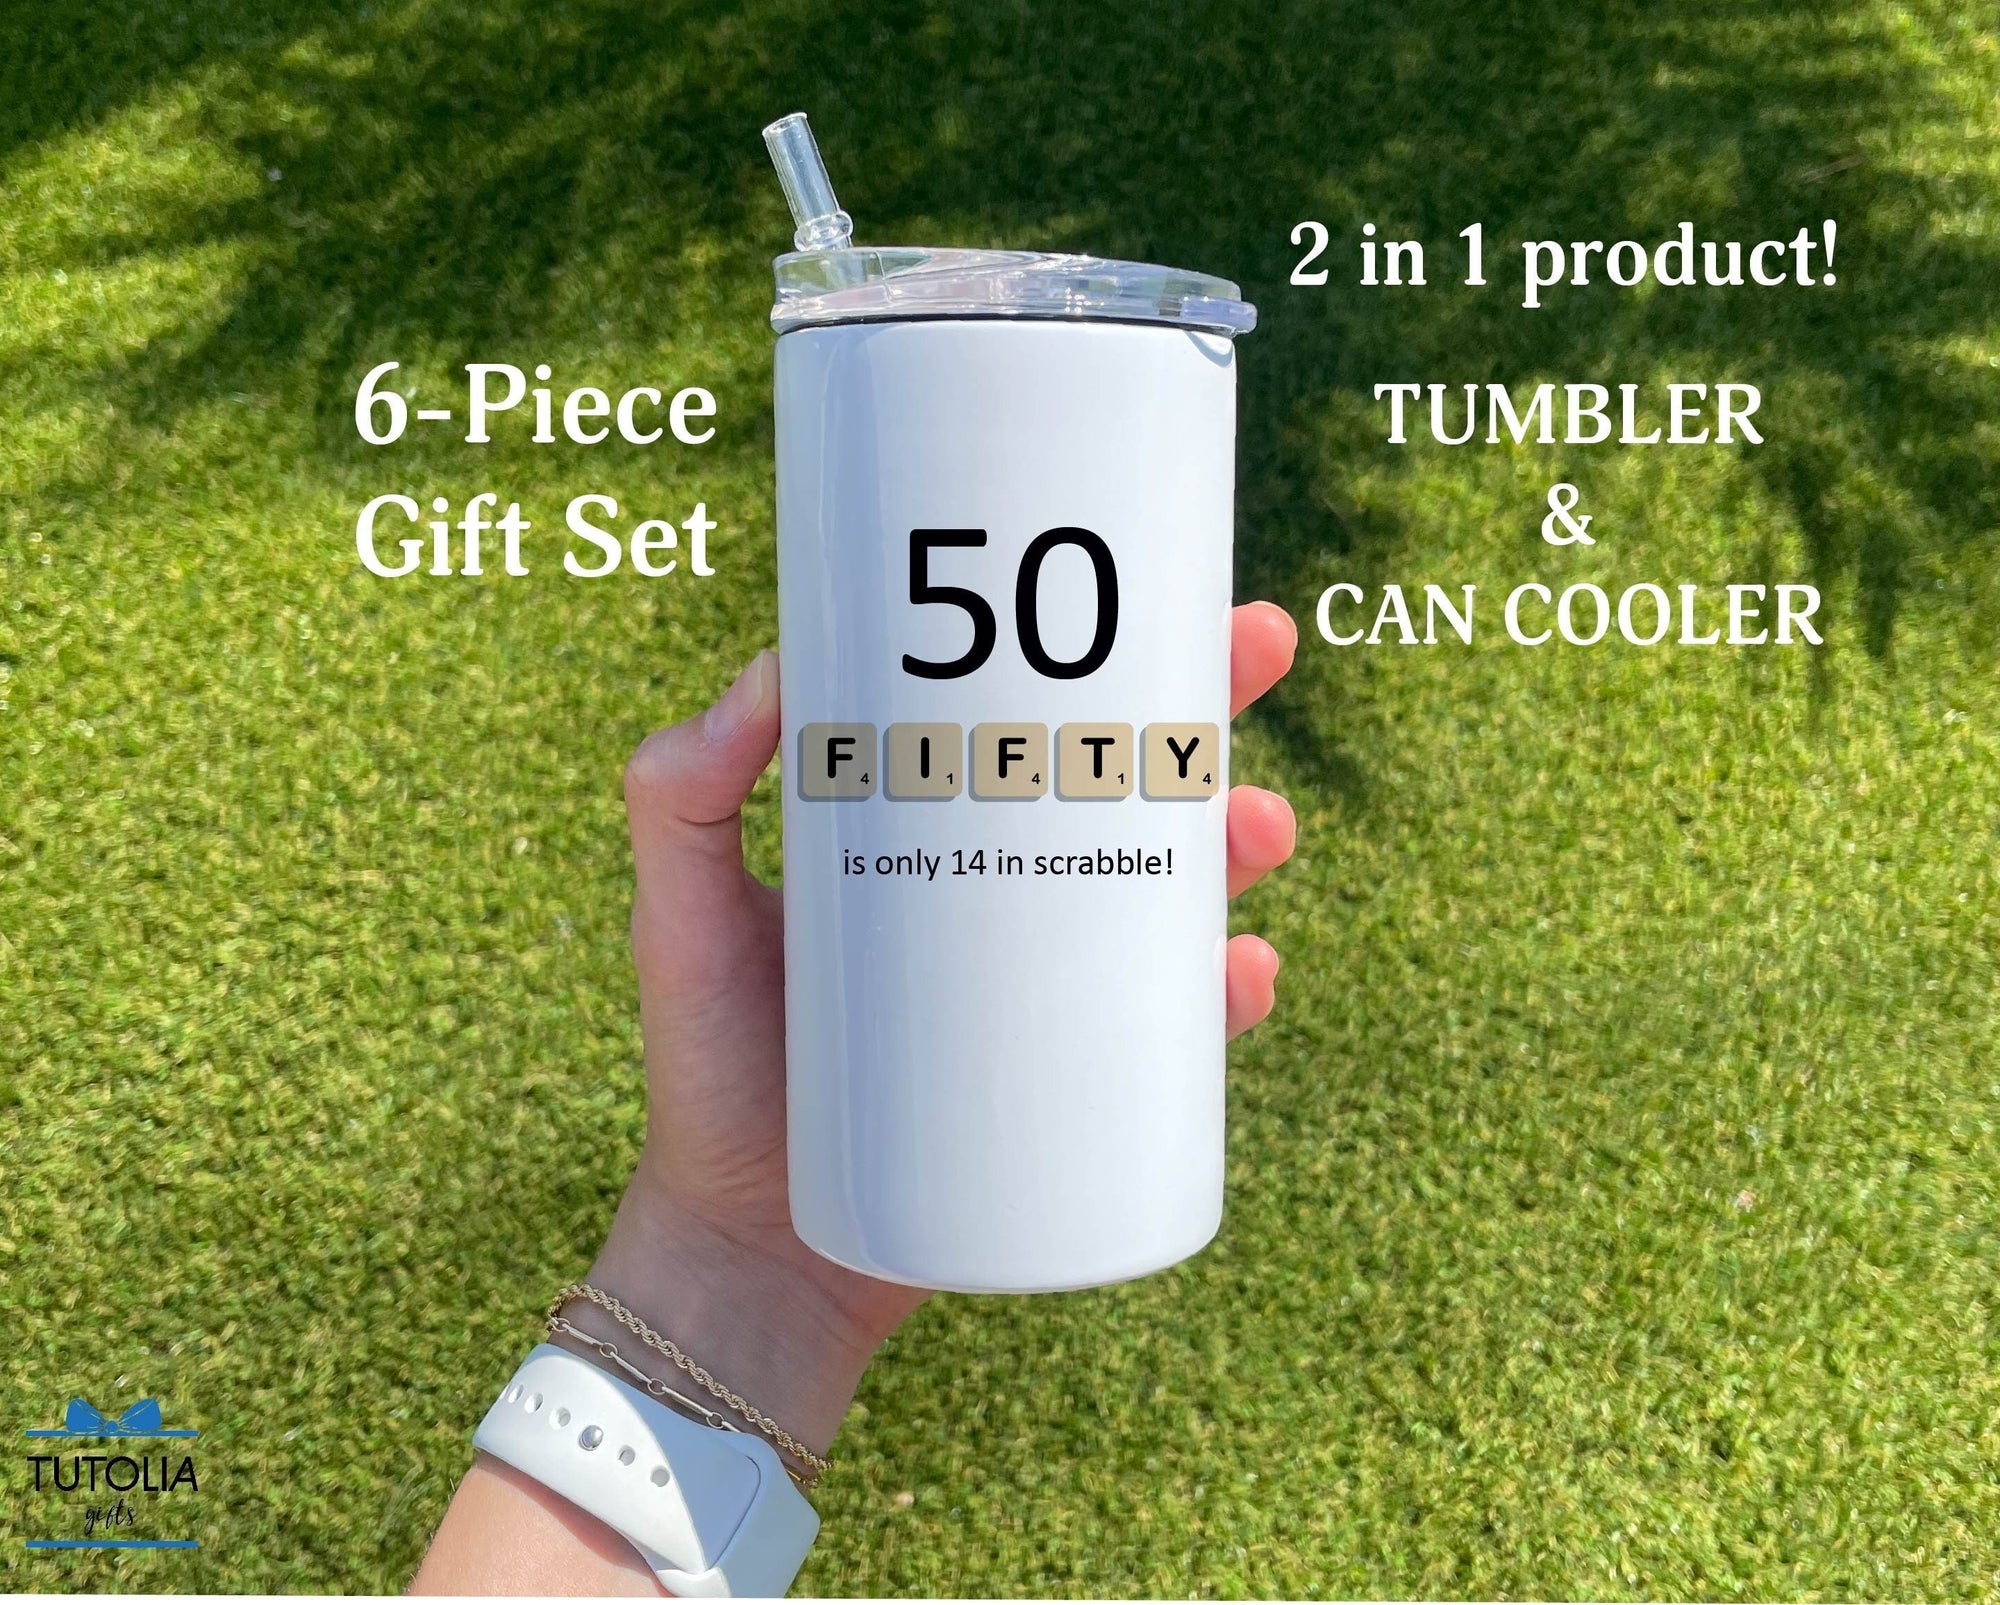 50 is only 14 in scrabble, 50th Birthday Gift, Born in 1974, 12 oz Slim/Thick duozie, gifts for women men Can cooler tumbler, Christmas Gift